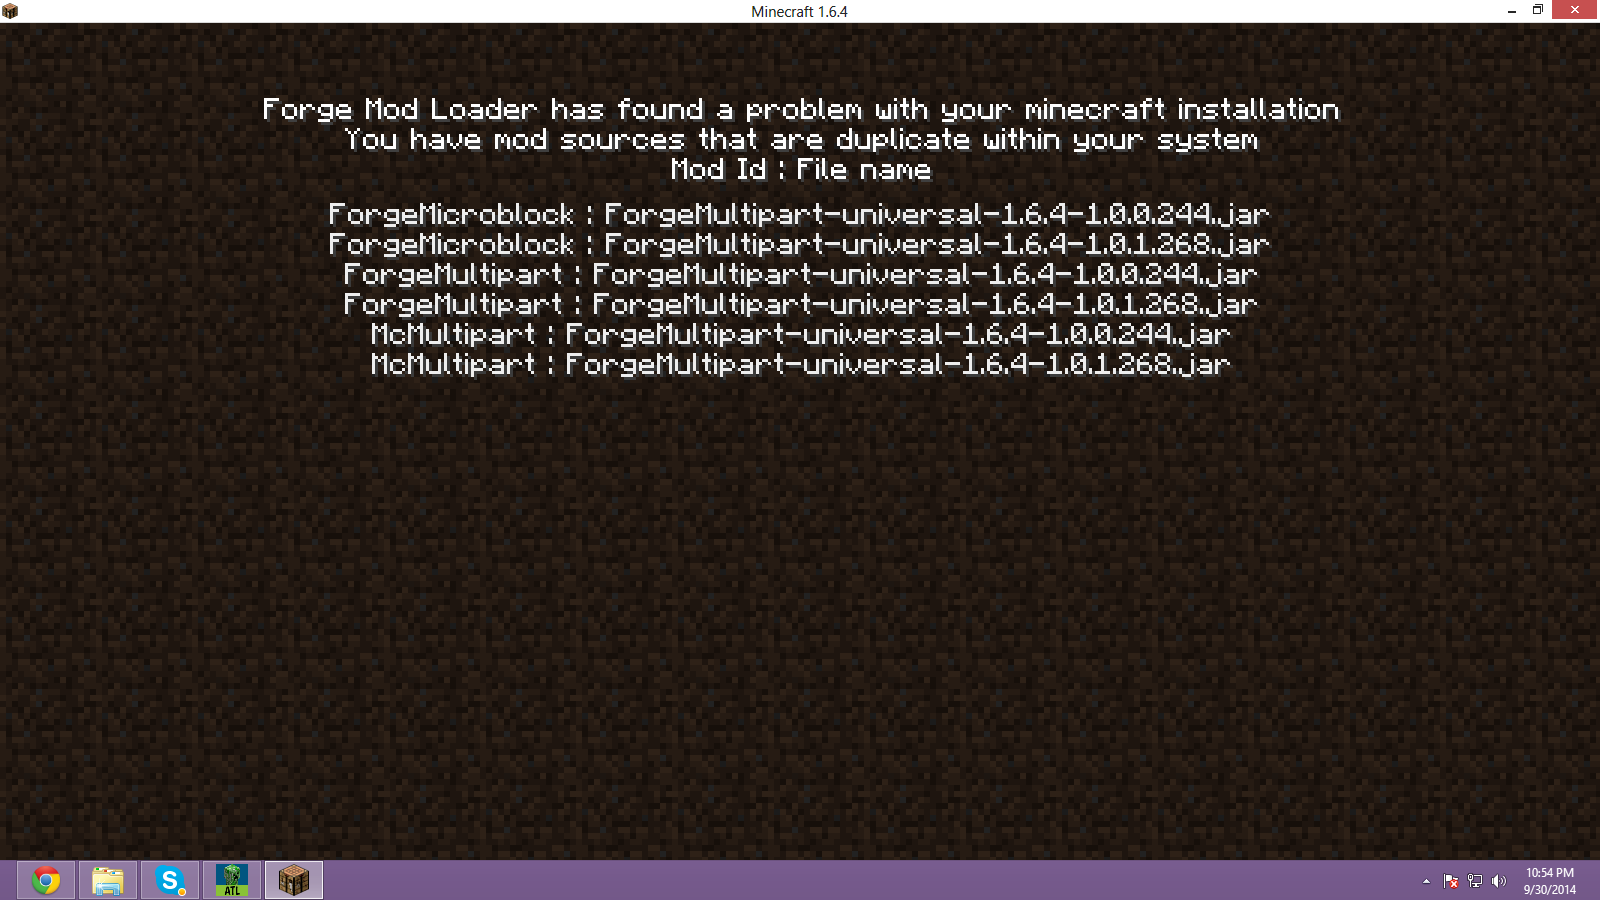 forge modloader has found a problem with your minecraft installation